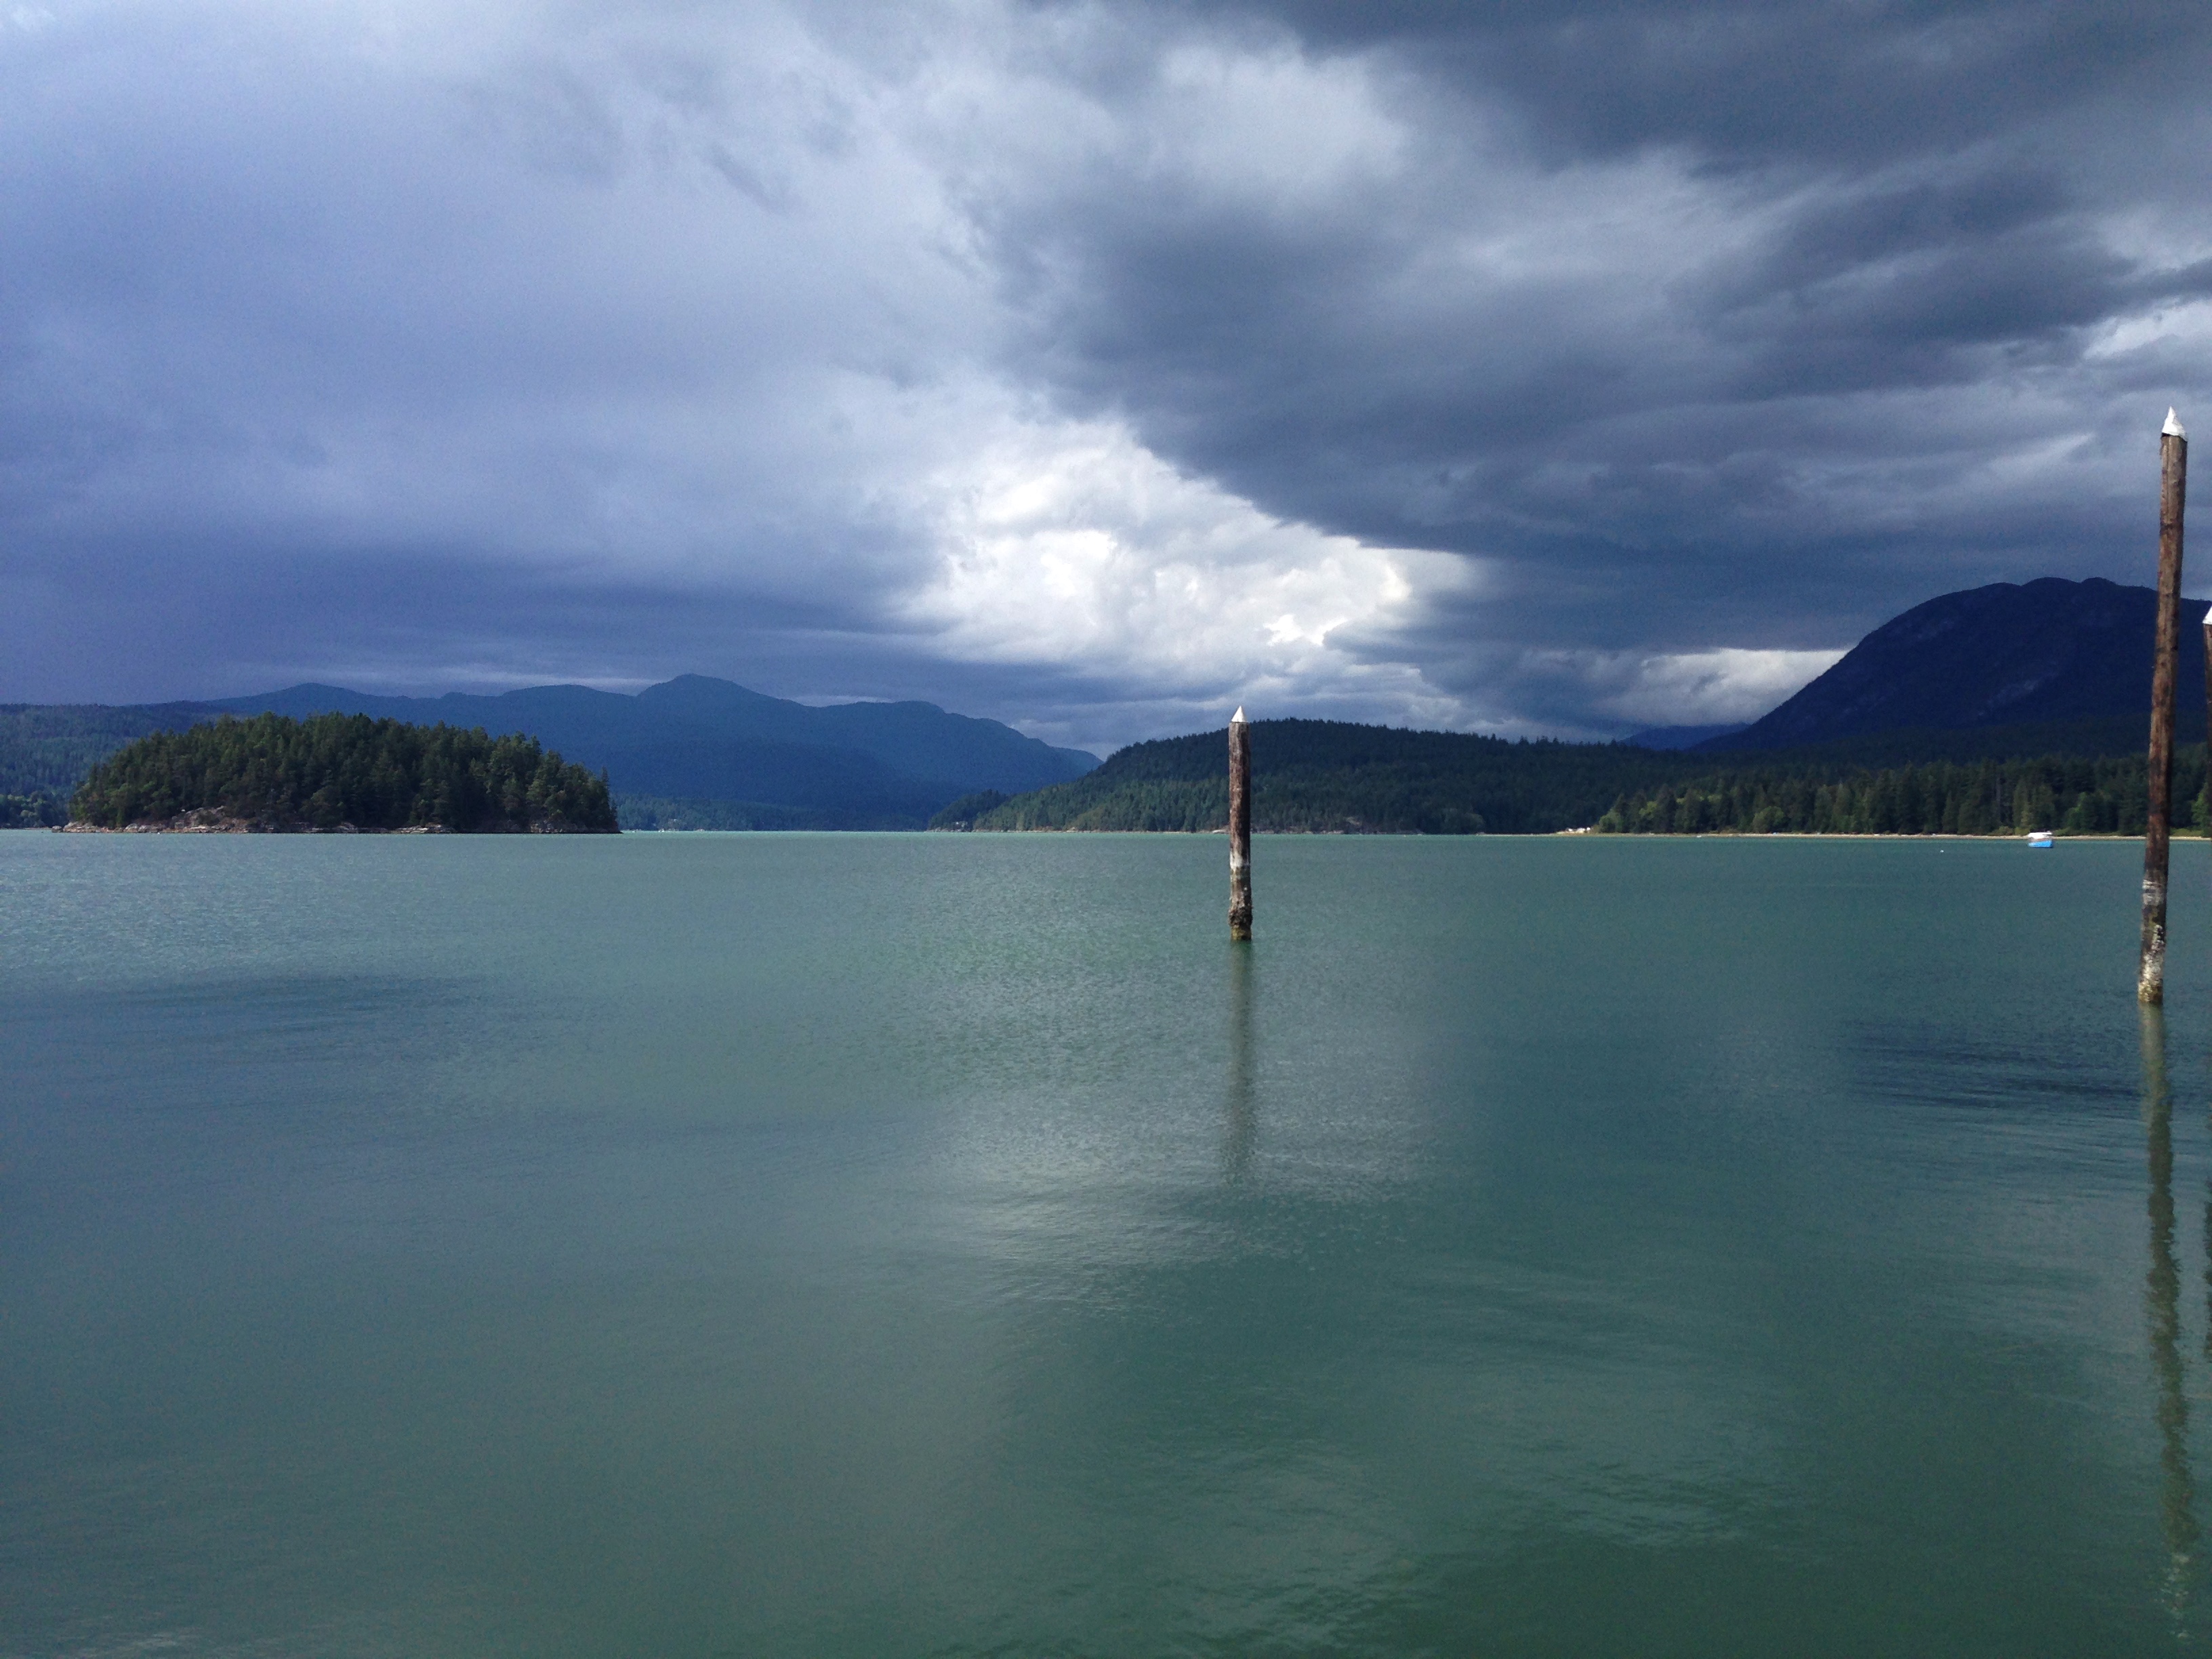 The green waters of the Sechelt Inlet due to an micro-algae bloom called cocclithophorids with a rain storm on the horizon.